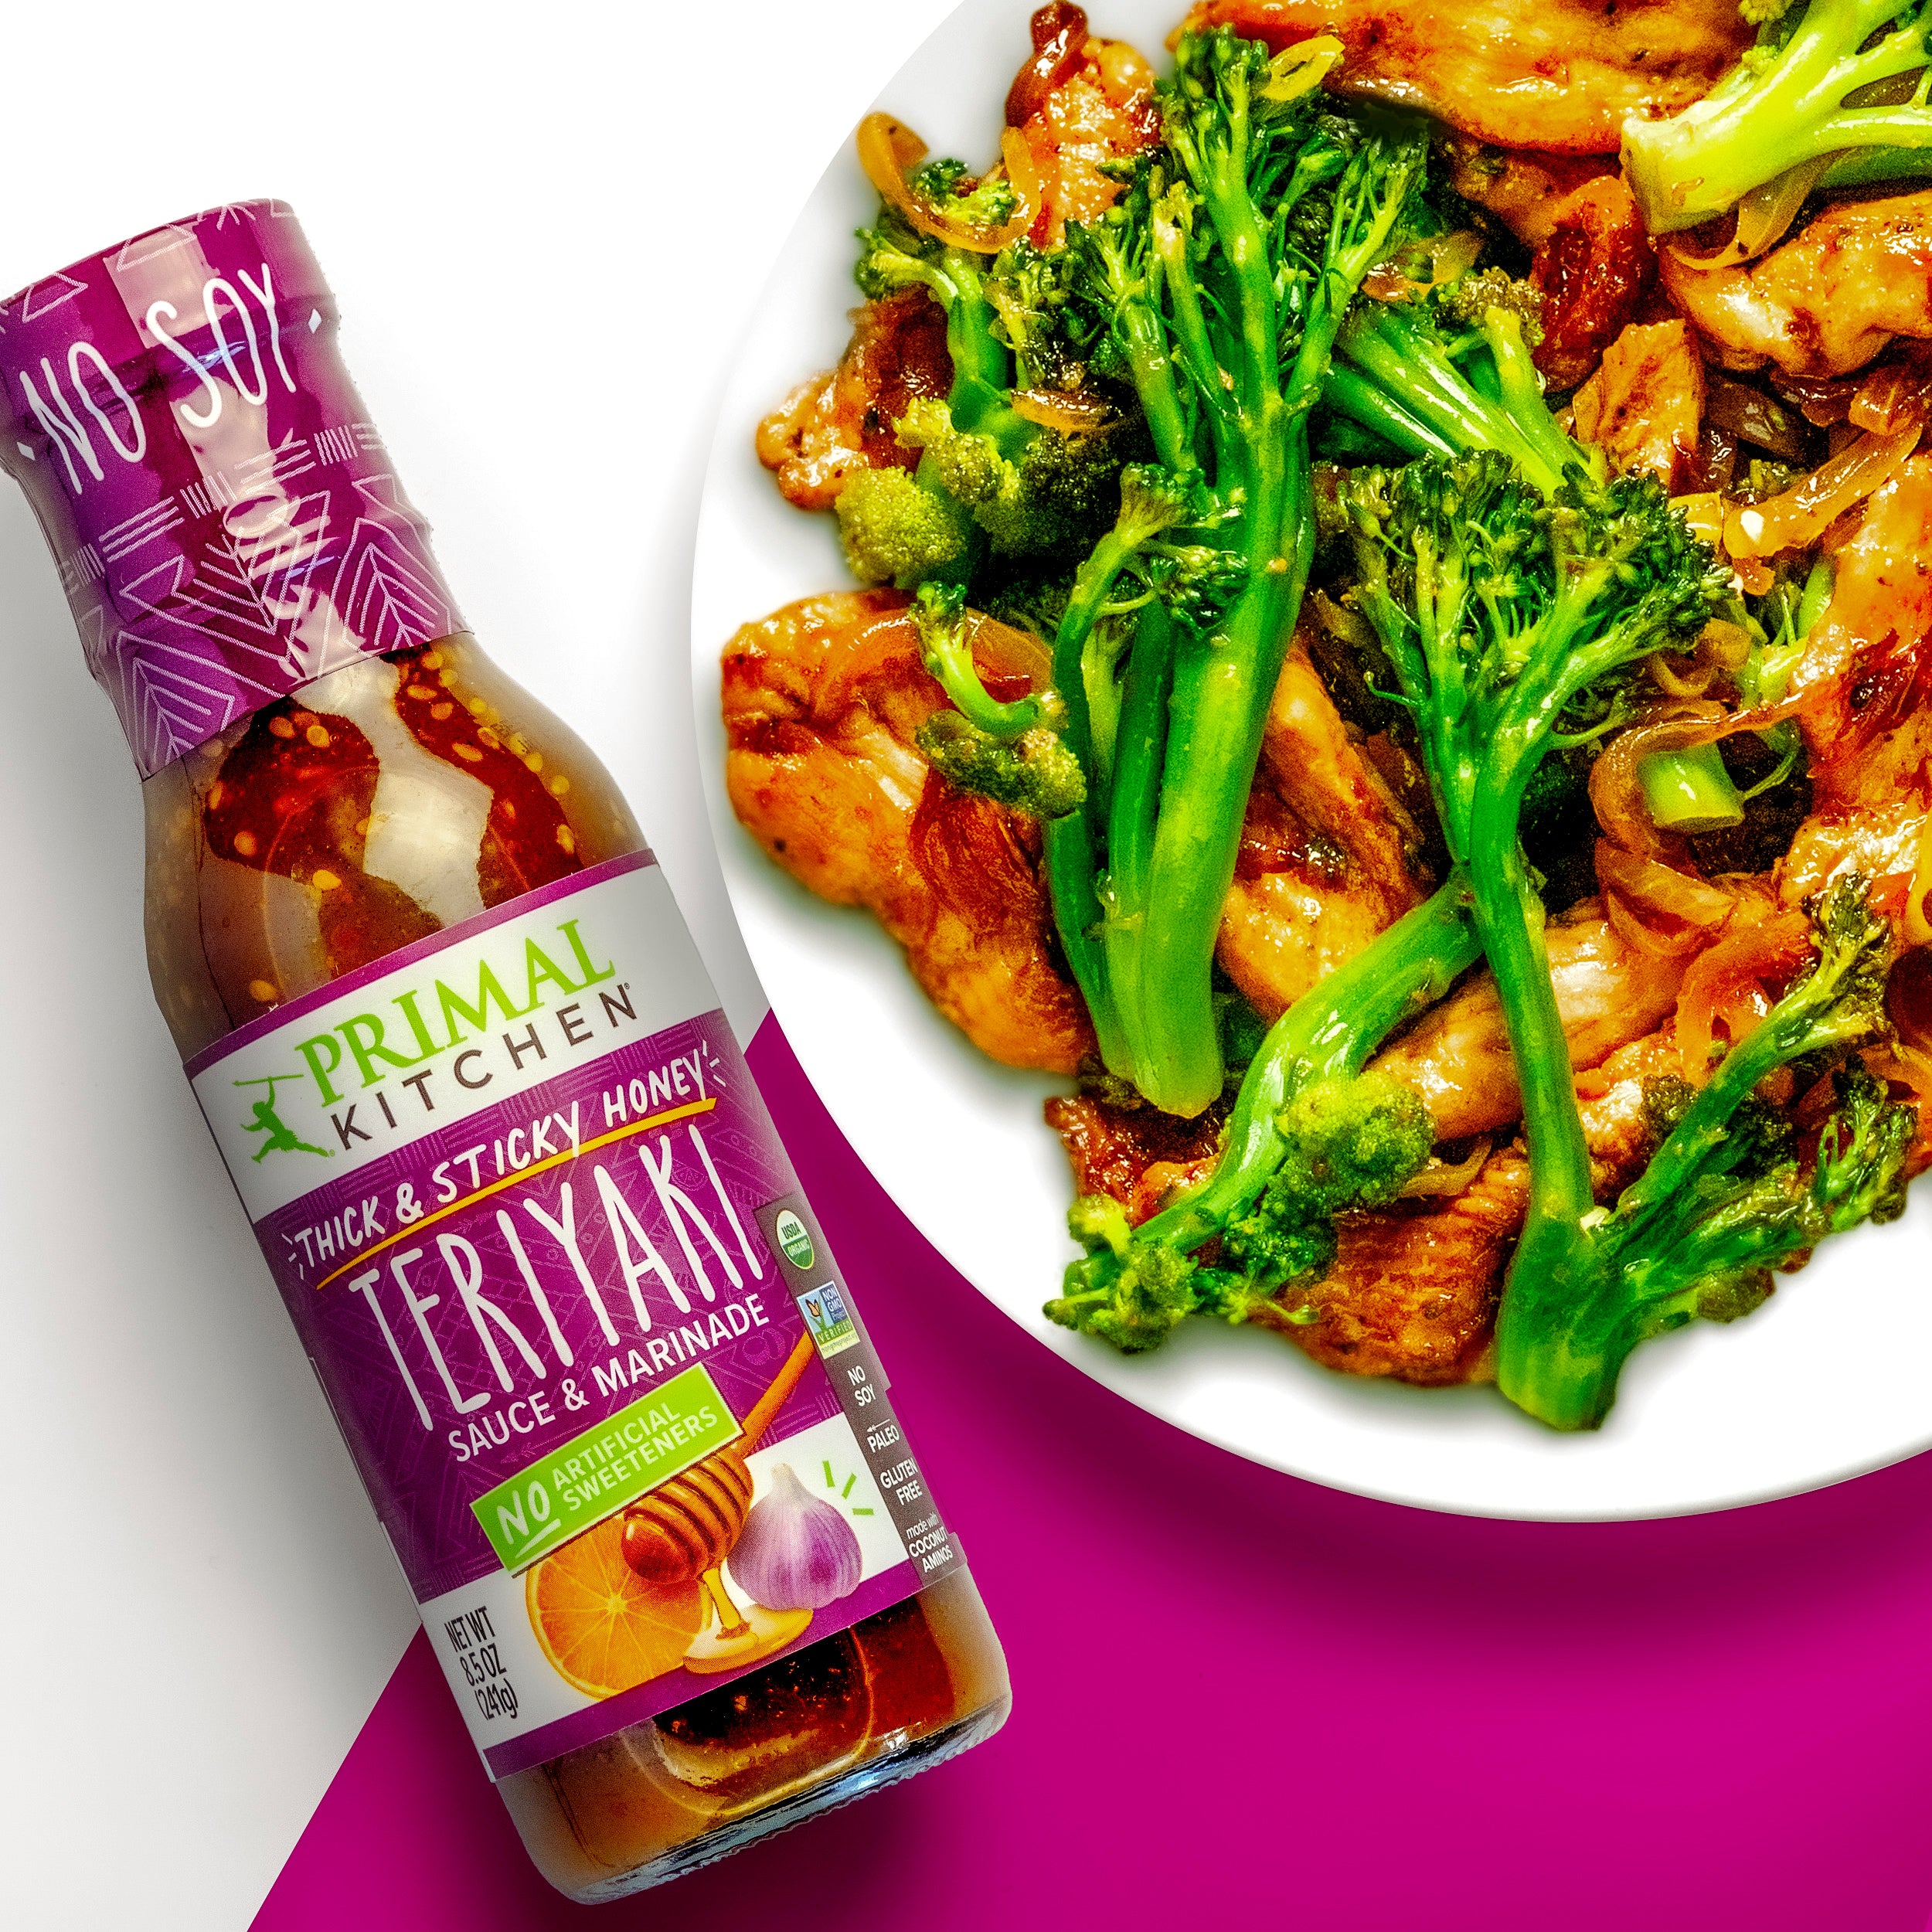 A white plate with stir fry chicken and broccolini alongside Primal Kitchen Thick & Sticky Honey Teriyaki Sauce & Marinade on a purple and white background